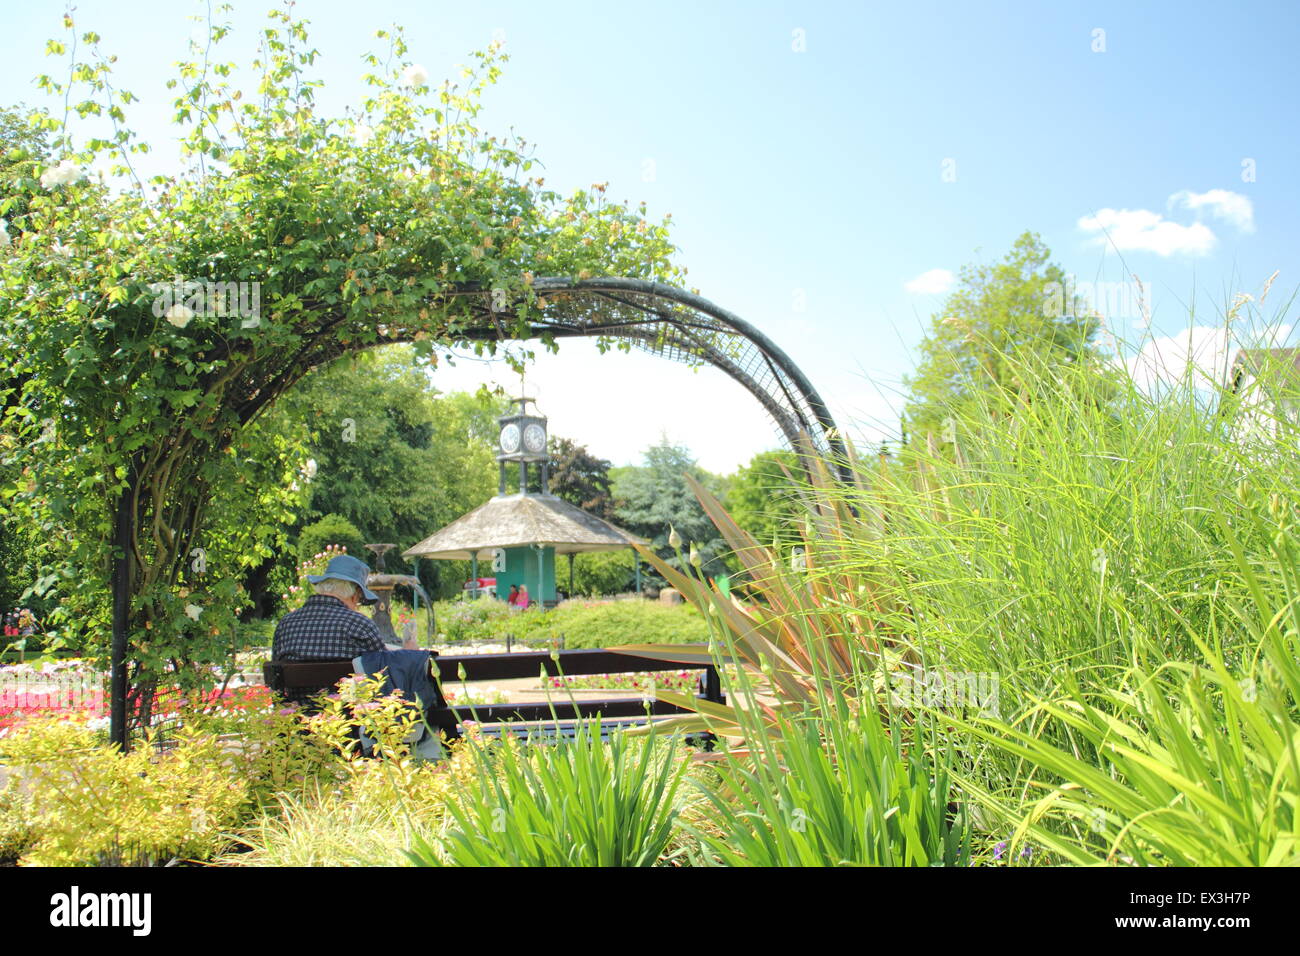 A man reads on a bench beneath a rose arch on a hot summer's day in Hall Leys Park, Matlock, Derbyshire Dales, England UK Stock Photo